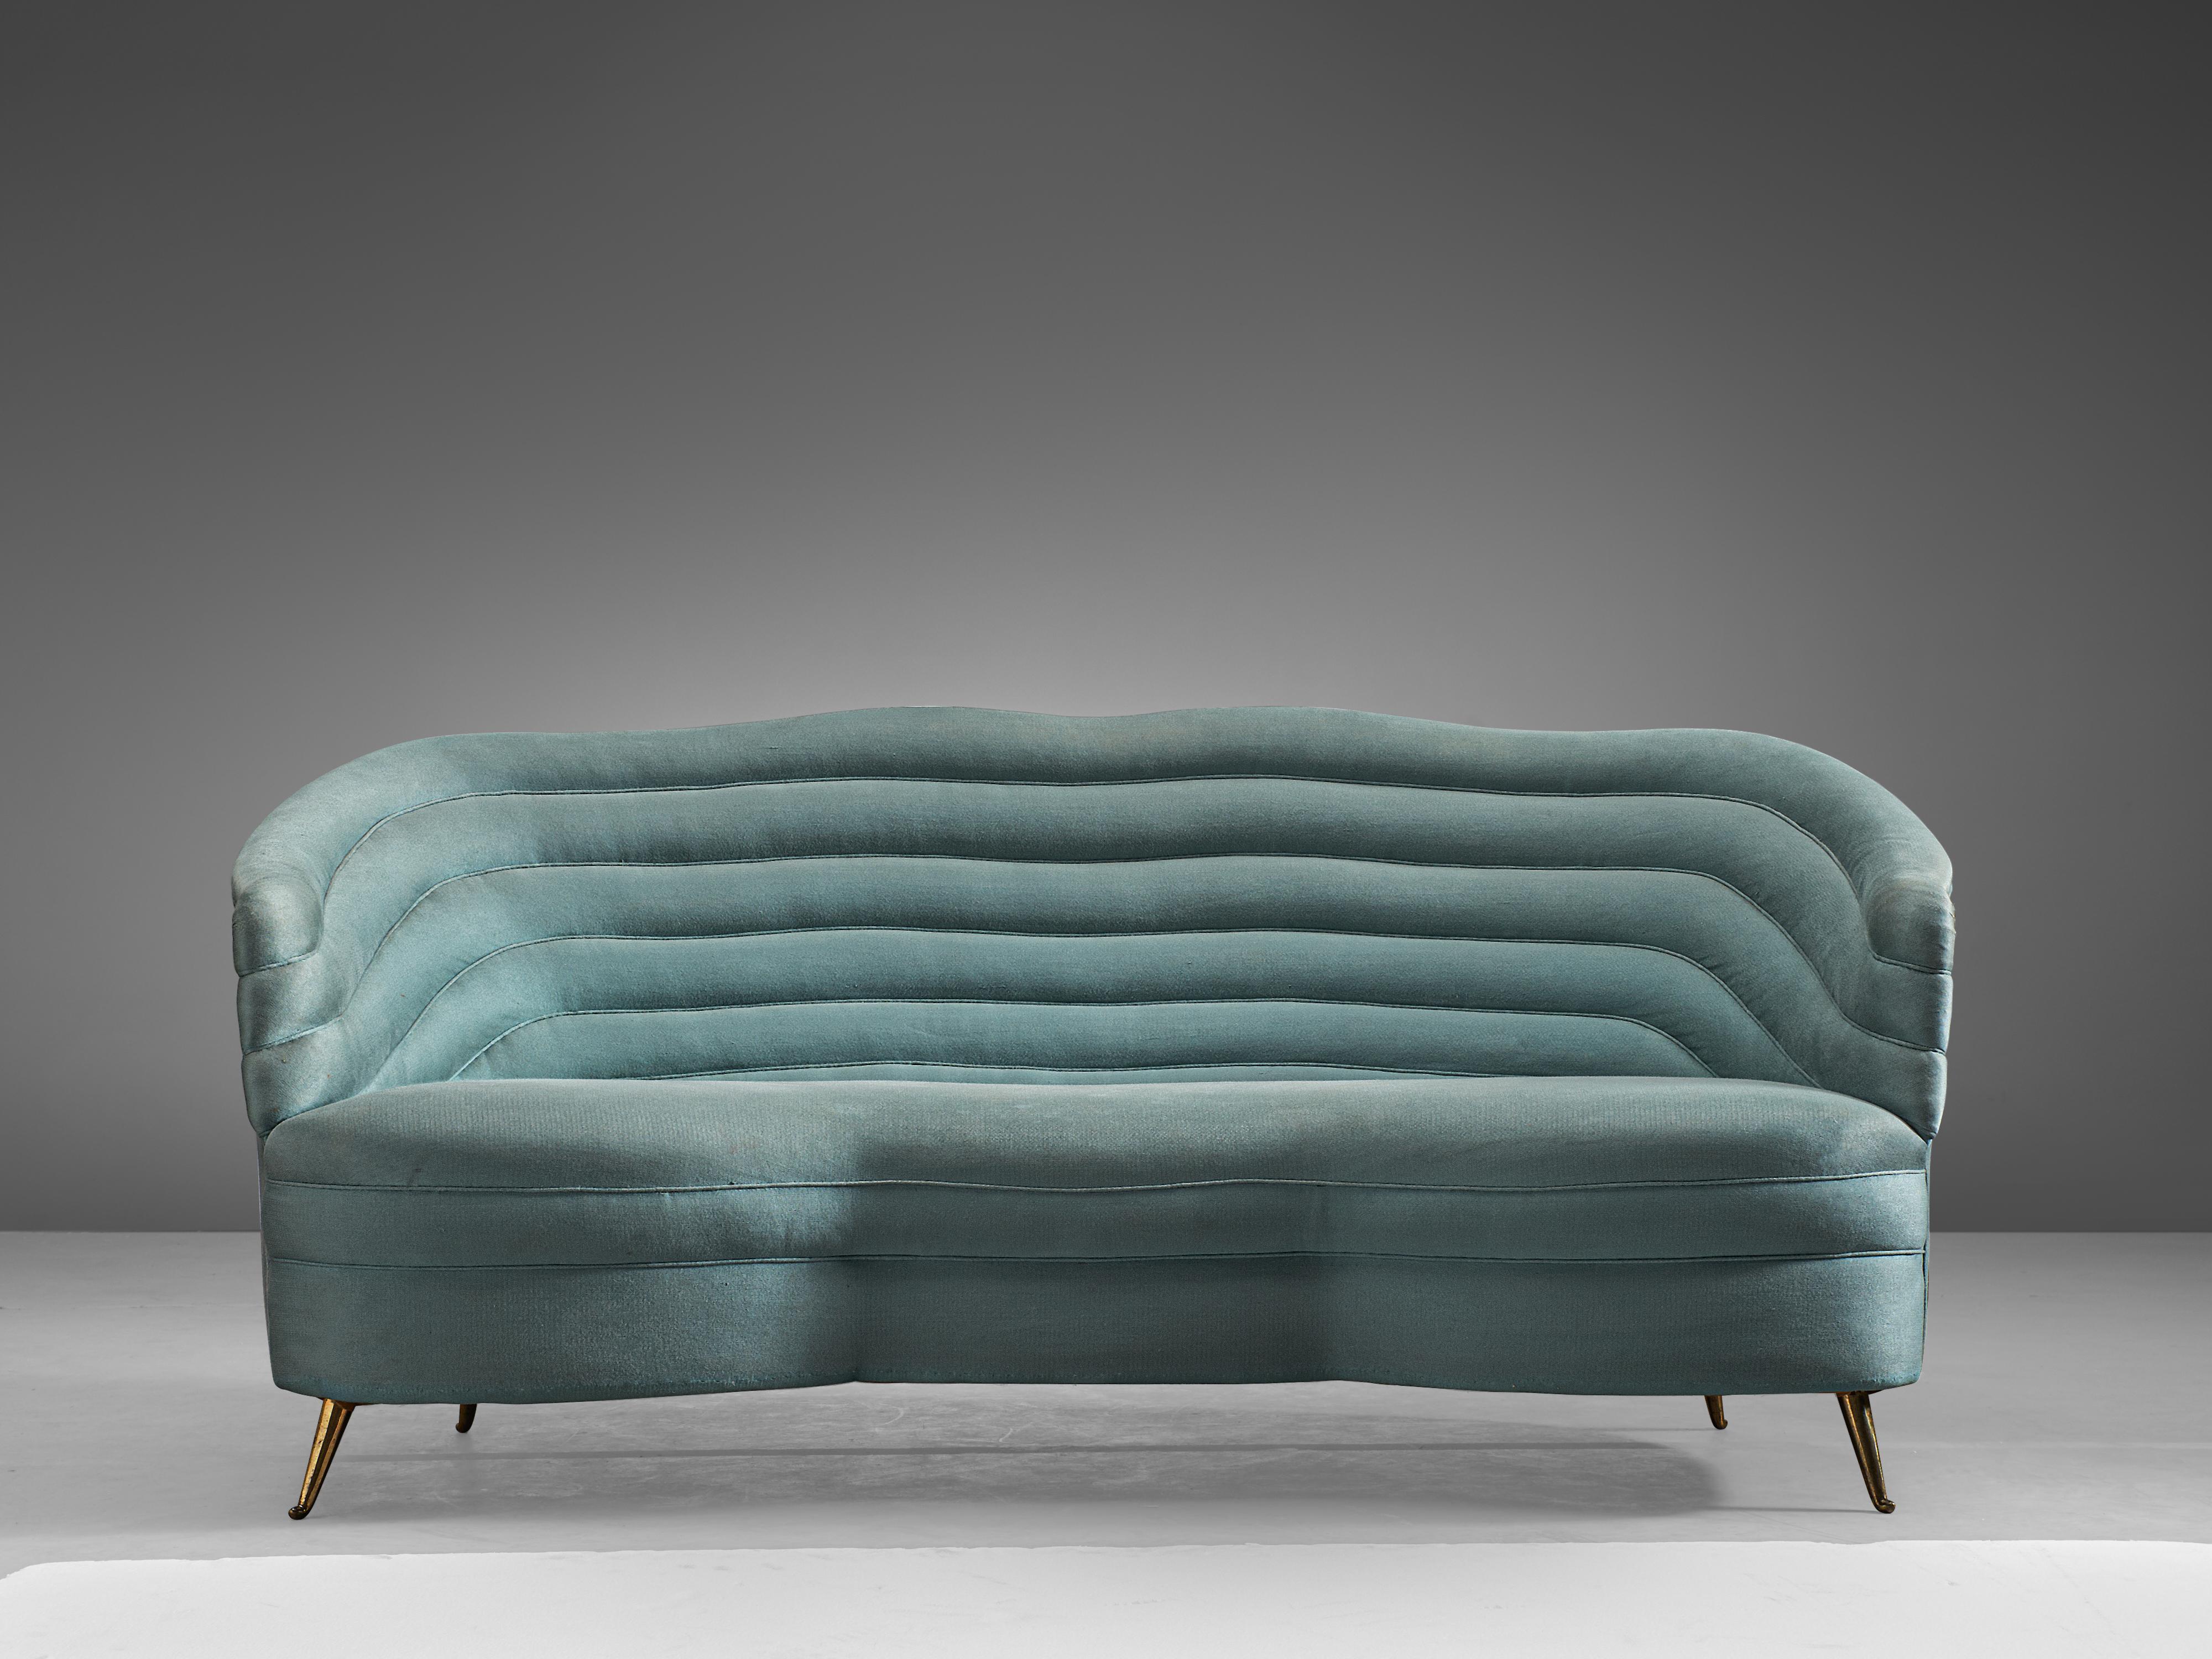 Andrea Busiri Vici, sofa, velvet, metal, Italy, 1960s

This elegant sofa features an aquamarine, light-blue velvet upholstery and is designed by Andrea Busiri. Andrea Busiri Vici (1903-1989) was an Italian architect who amongst other things